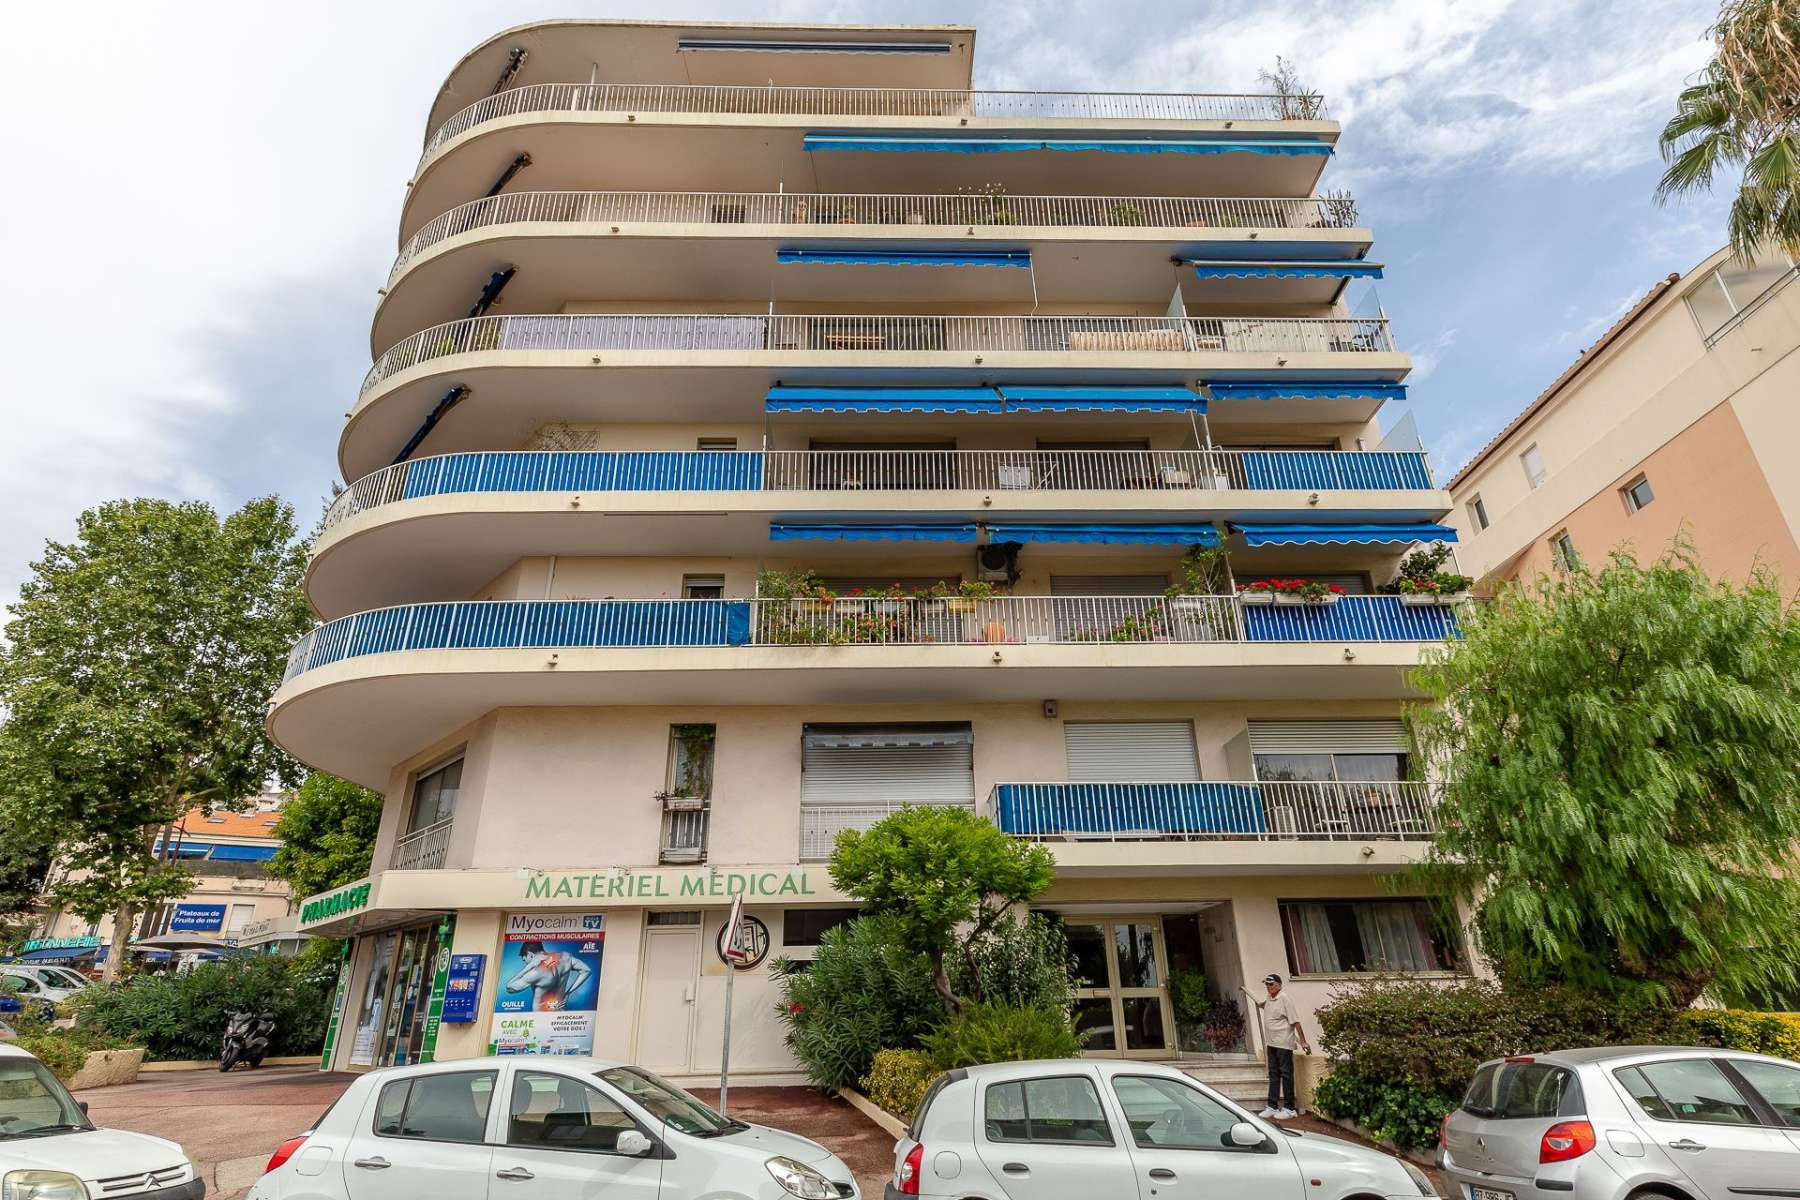 Two-bedroom apartment in Cannes, Carnot area, close to all amenities